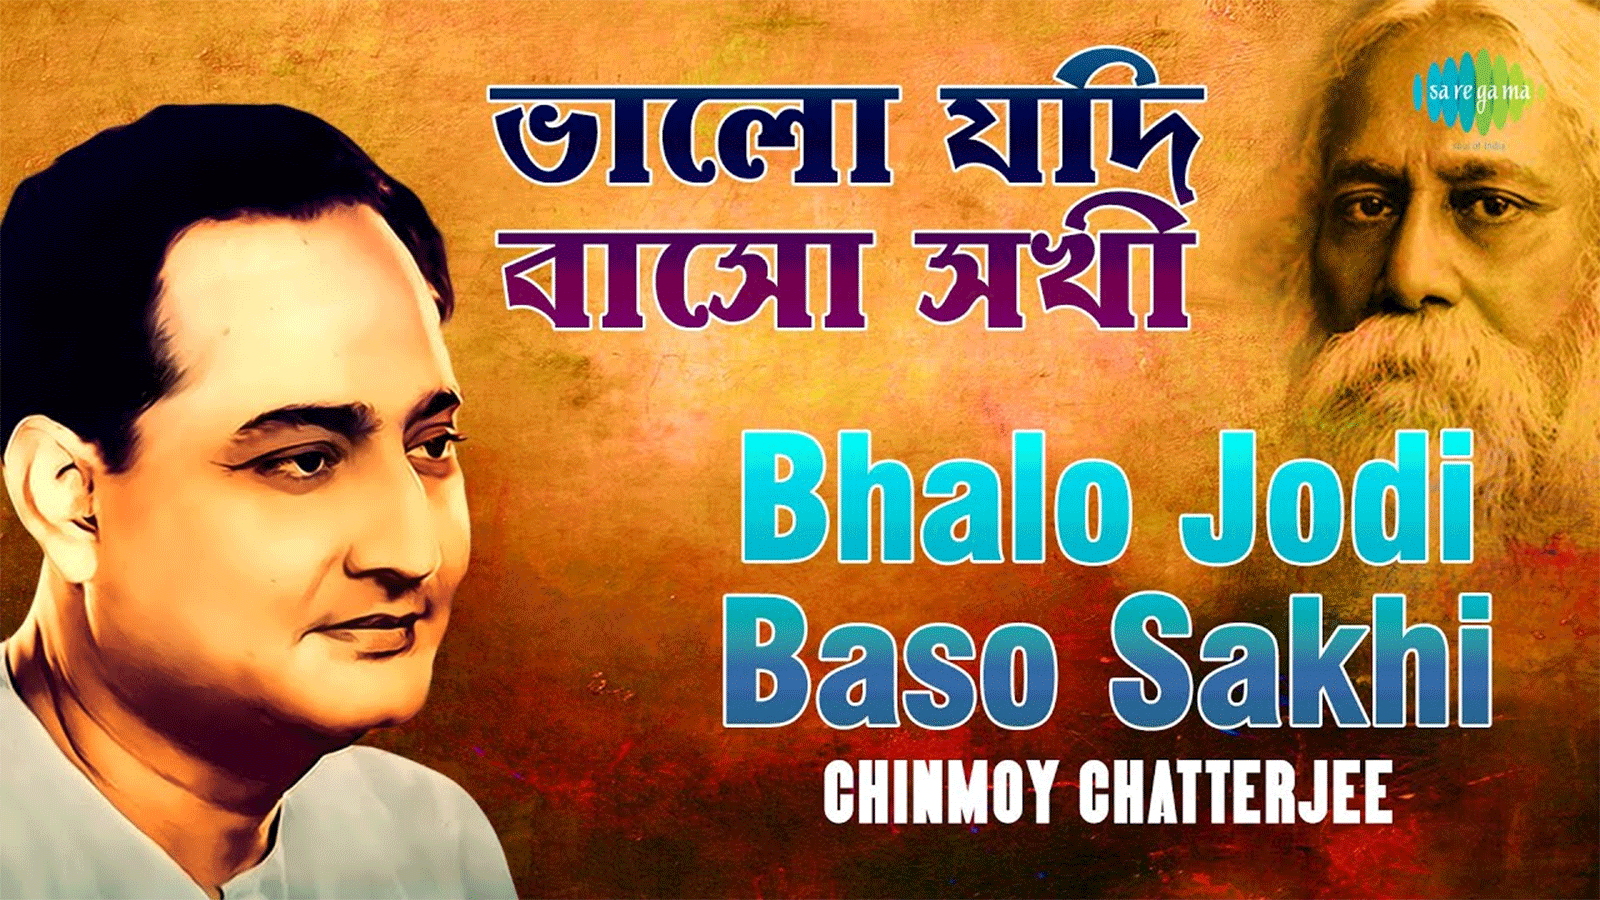 Listen to Popular Bengali Audio Song - 'Bhalo Jodi Baso Sakhi' Sung By  Chinmoy Chatterjee | Bengali Video Songs - Times of India